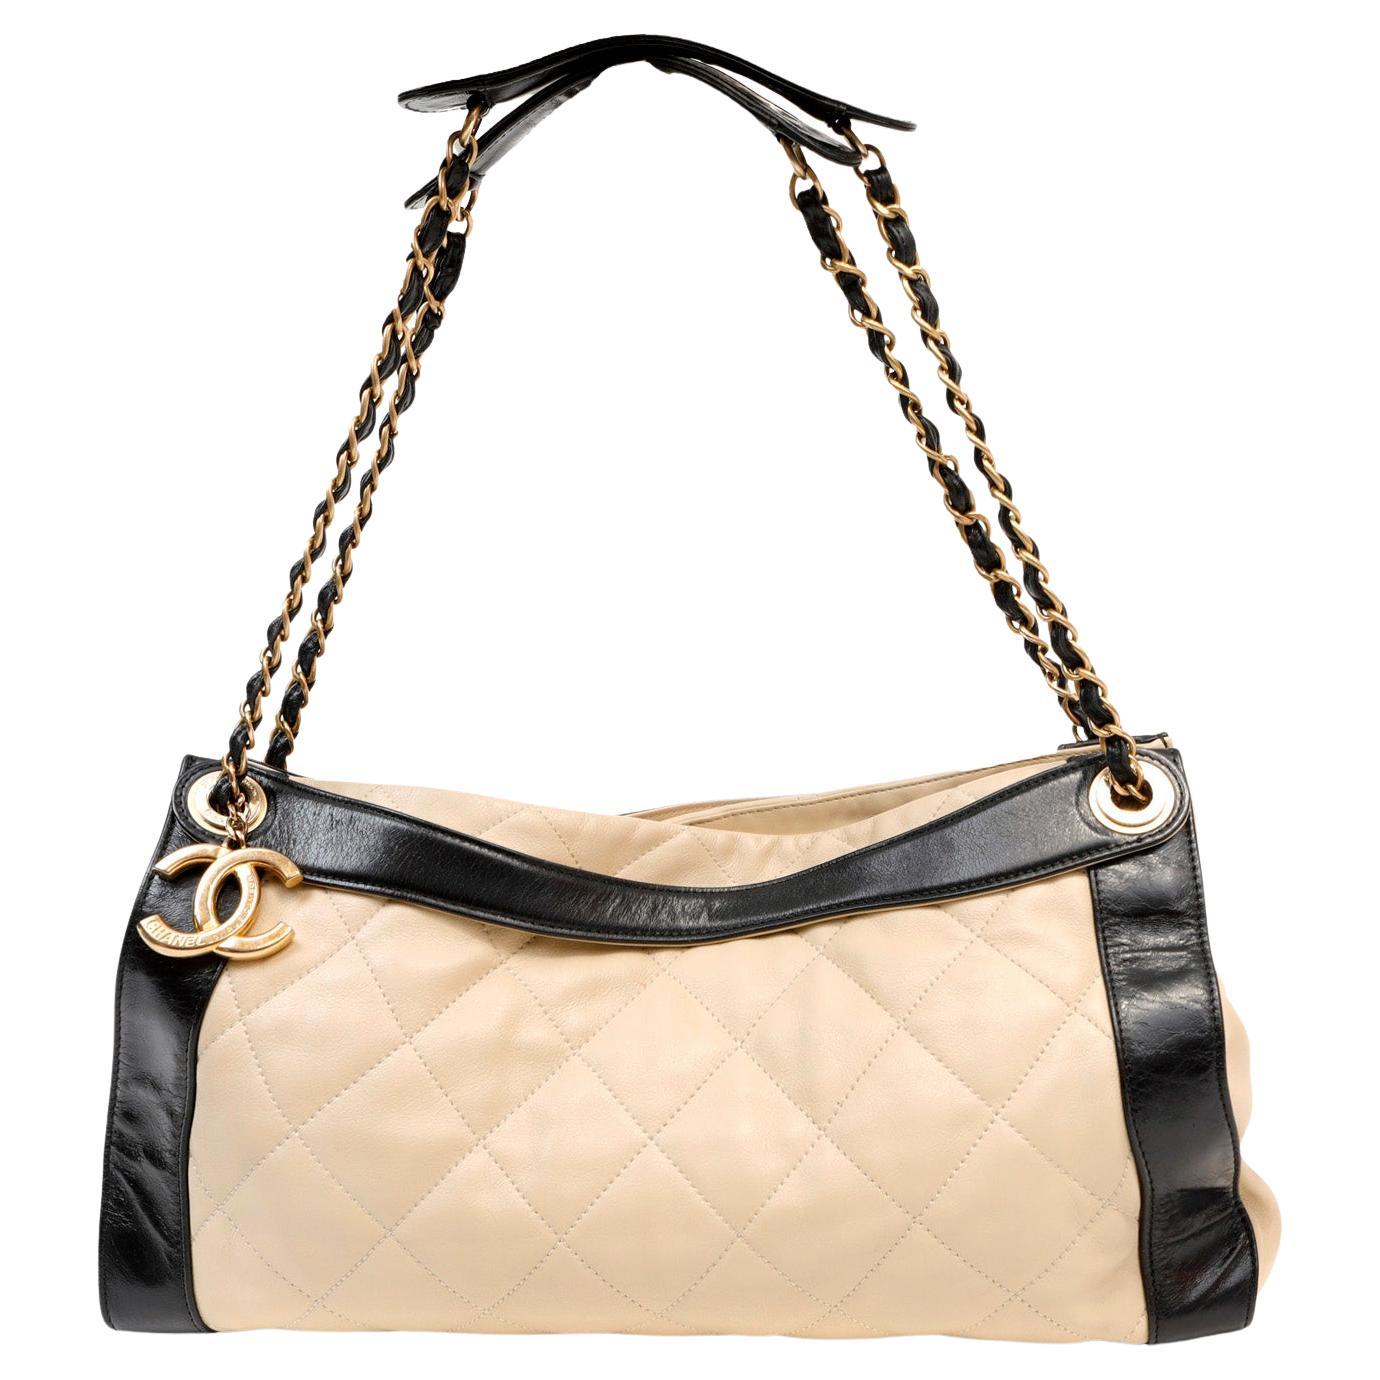 Chanel Ivory and Black Quilted Leather Tote